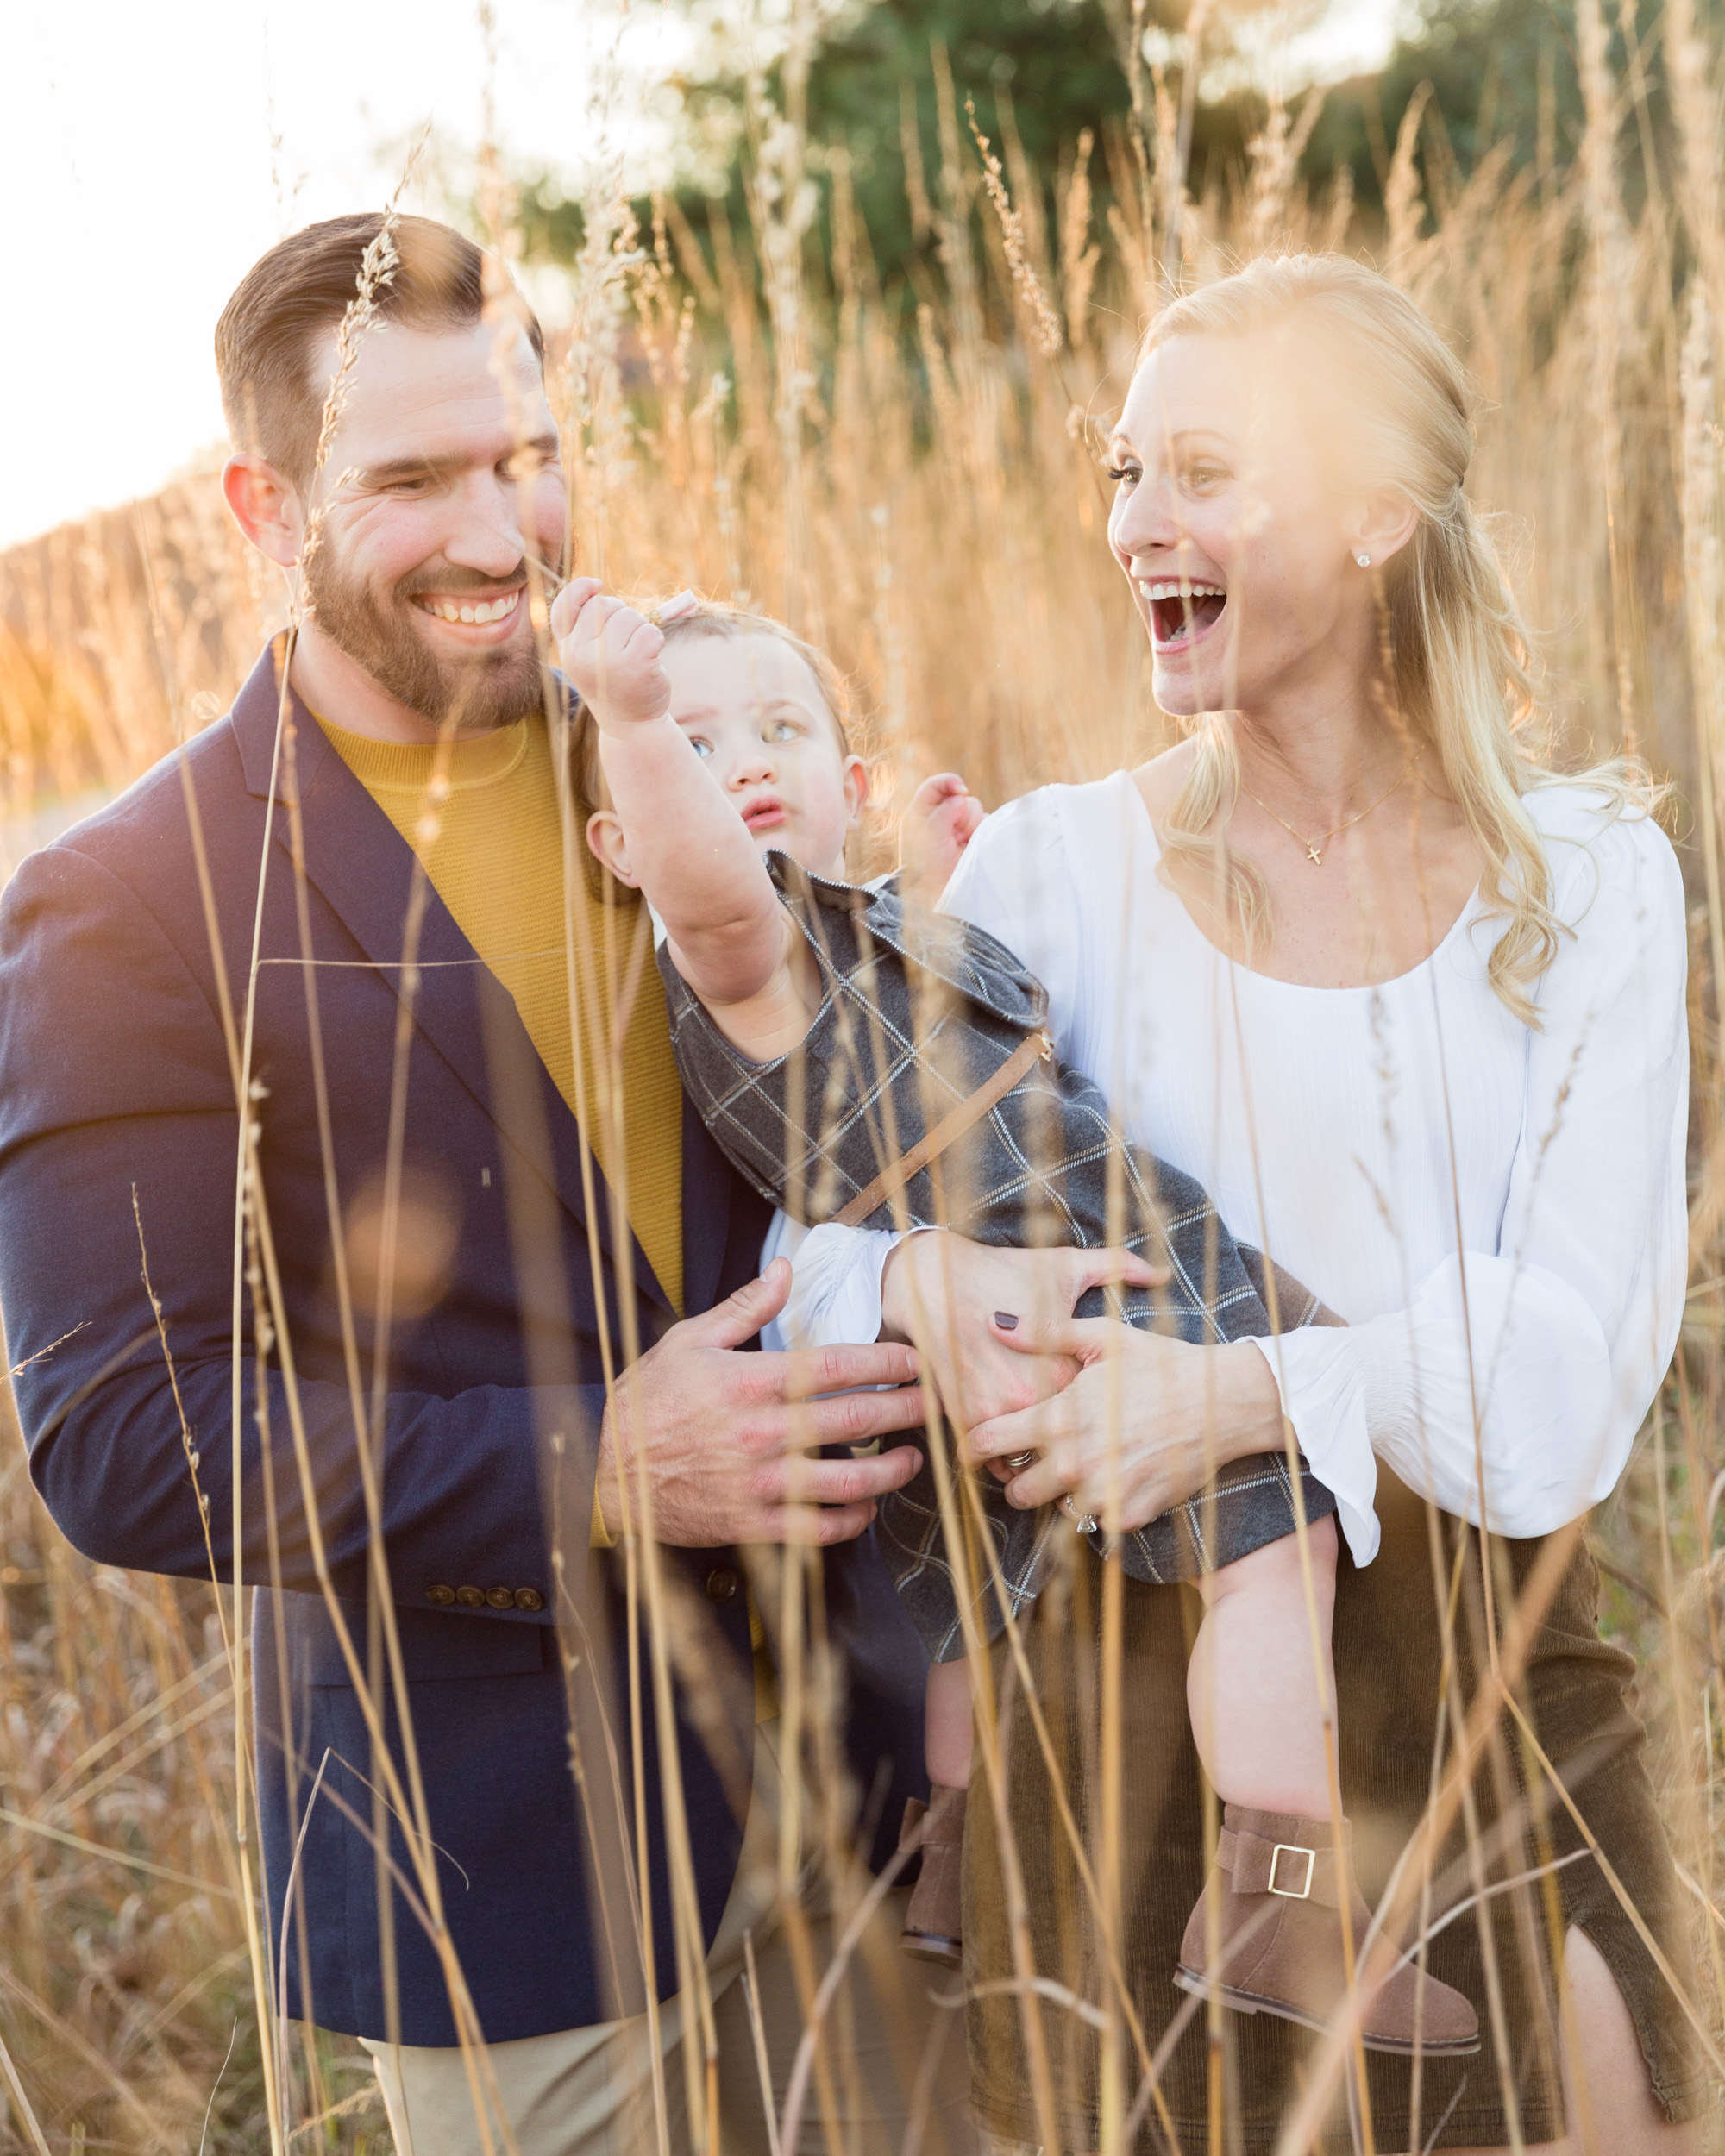 Modern family portraits in Whitehouse Station, NJ by Laura Billingham Photography